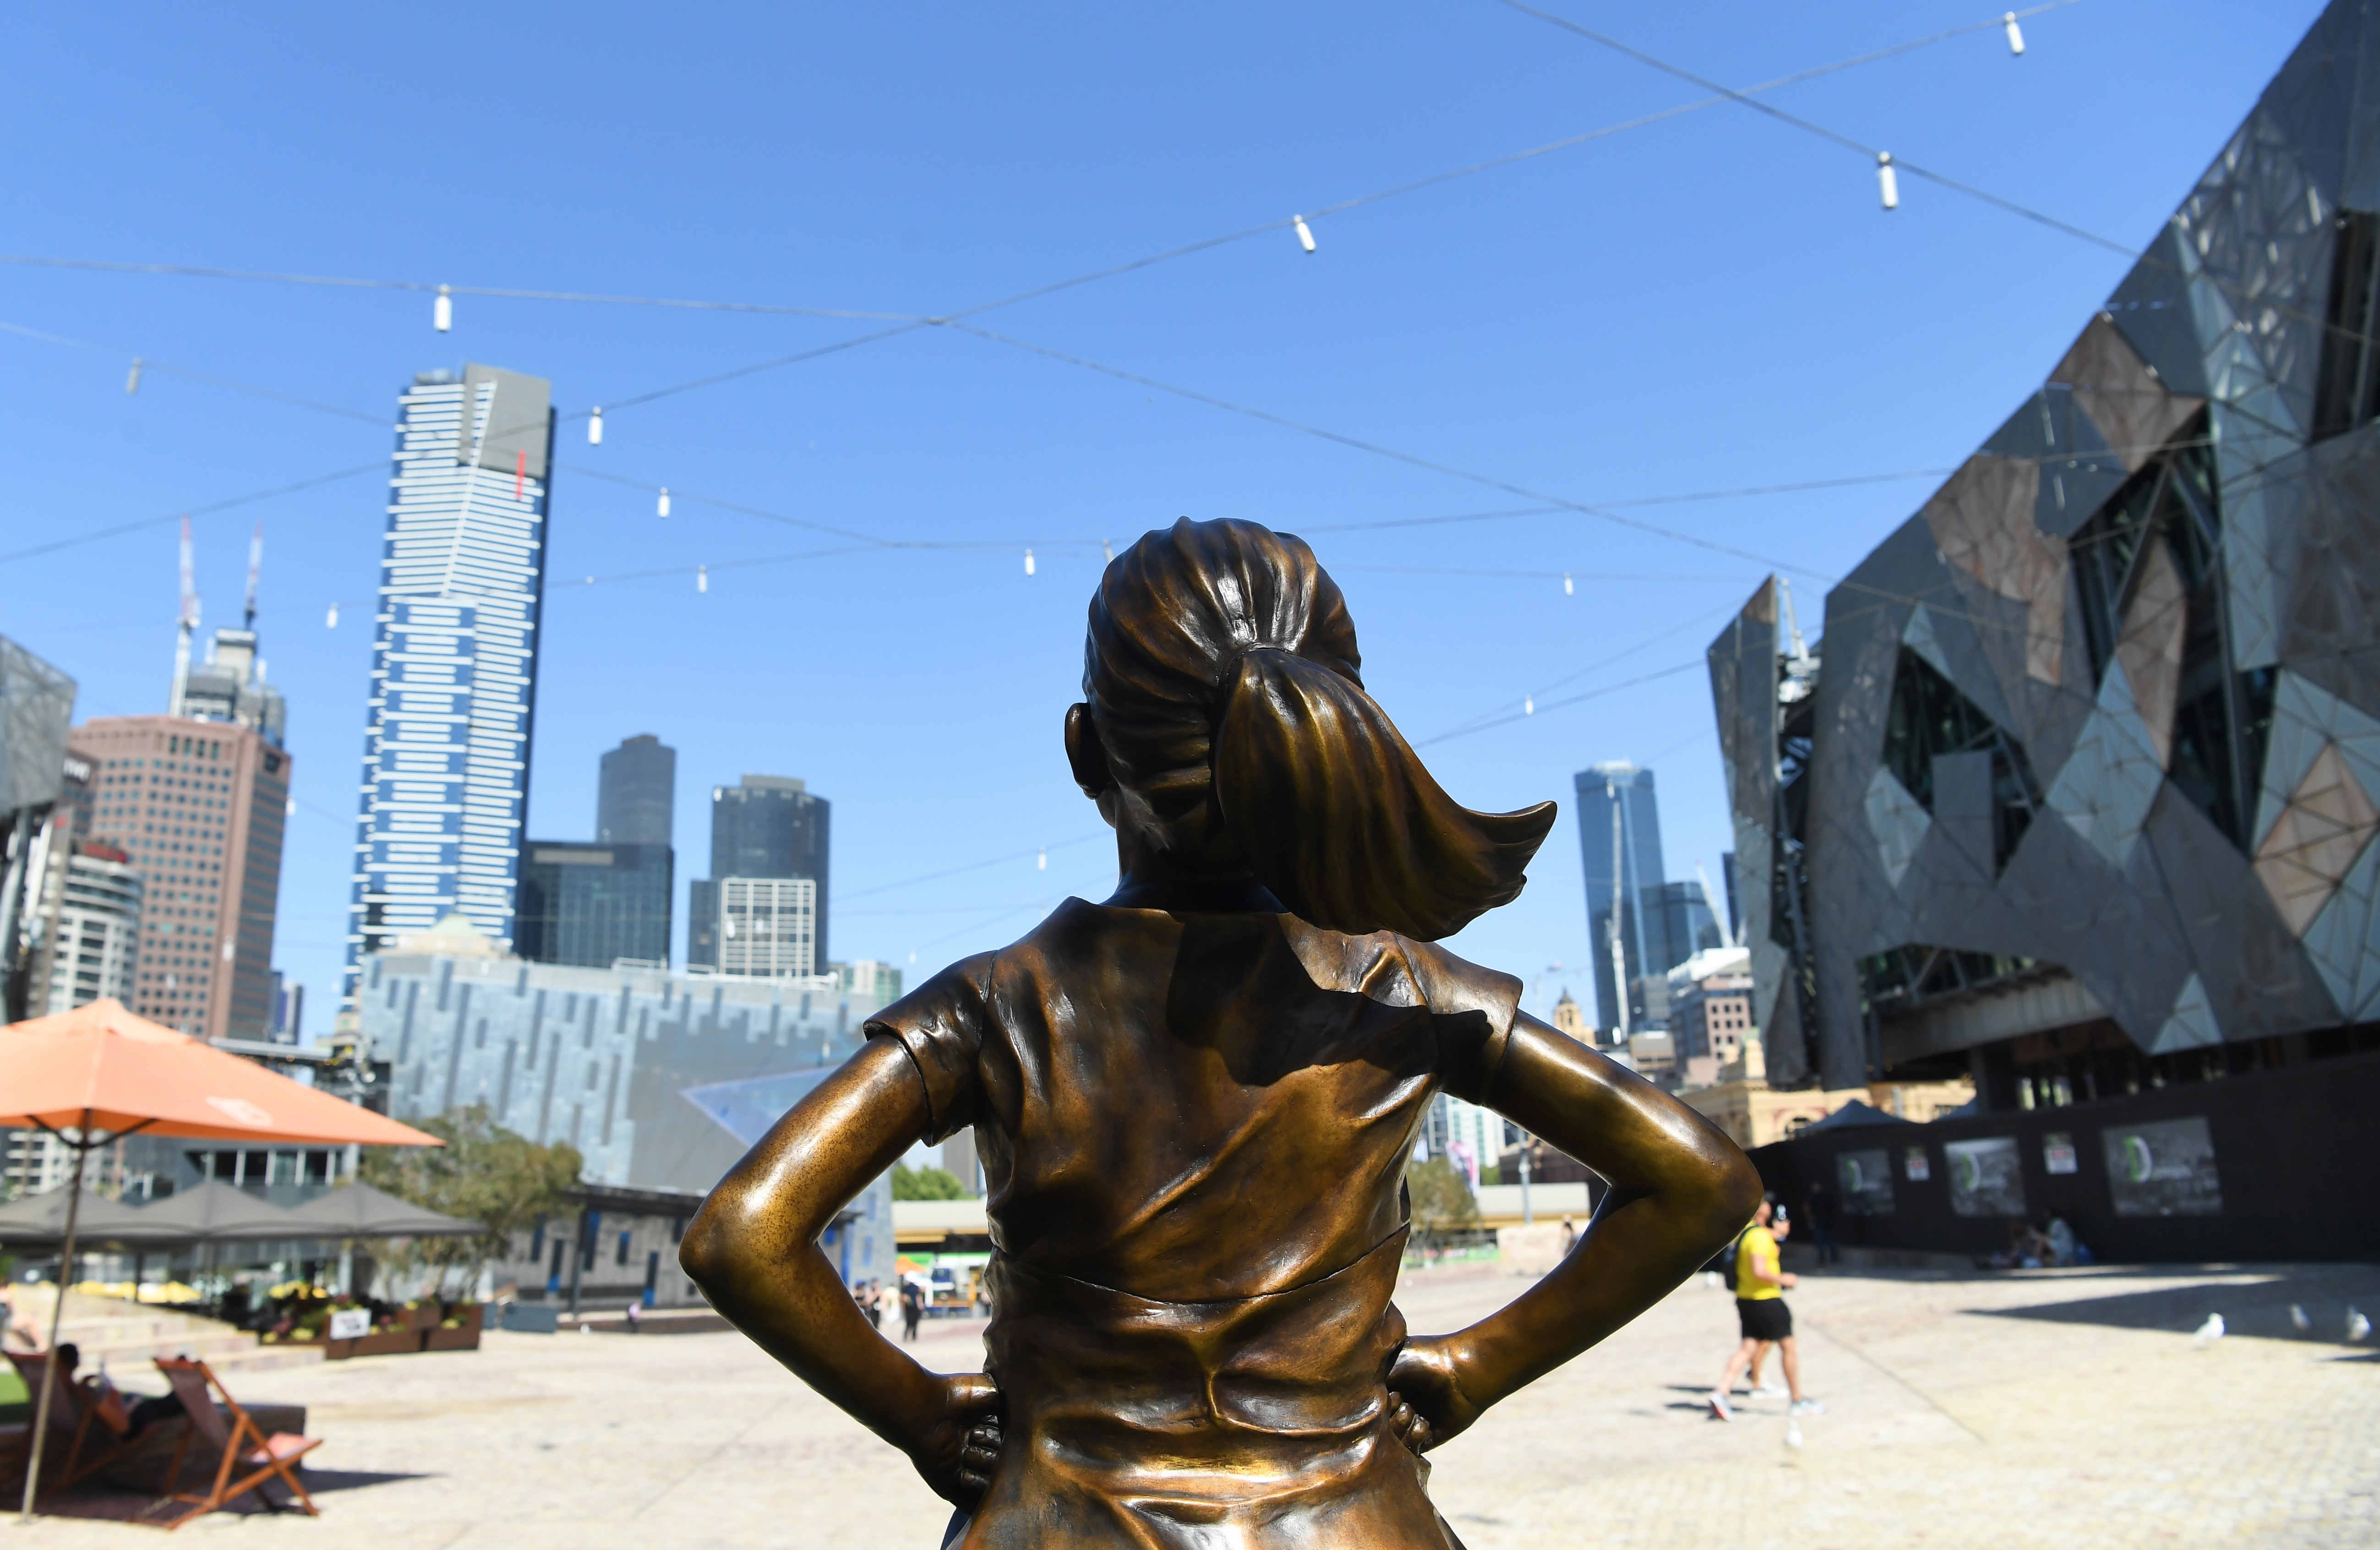 A replica of New York’s “Fearless Girl” statue stands at Federation Square in Melbourne, Australia. The replica was unveiled by artist Kristen Visbal ahead of International Women’s Day on March 8. Photo: EPA-EFE